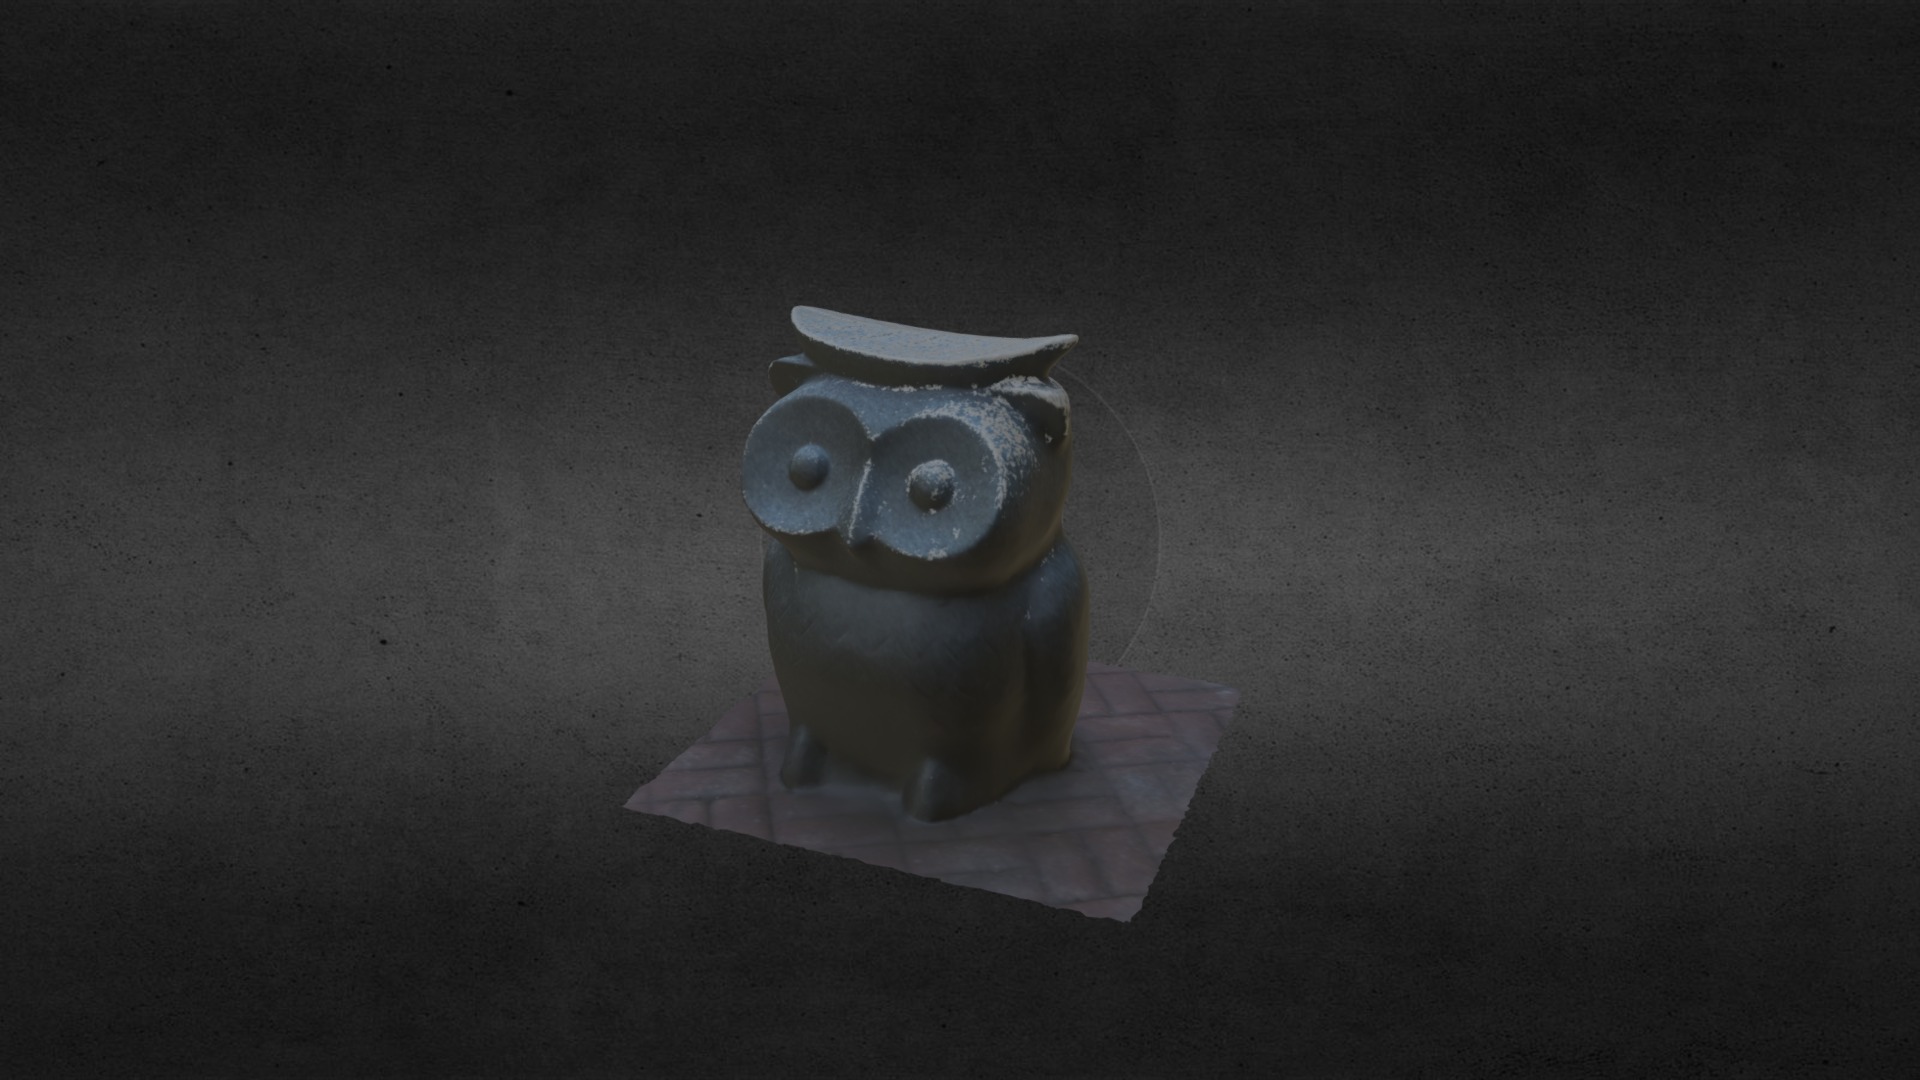 3D model Siu Hong – Owl Ornement - This is a 3D model of the Siu Hong - Owl Ornement. The 3D model is about a small clay owl.